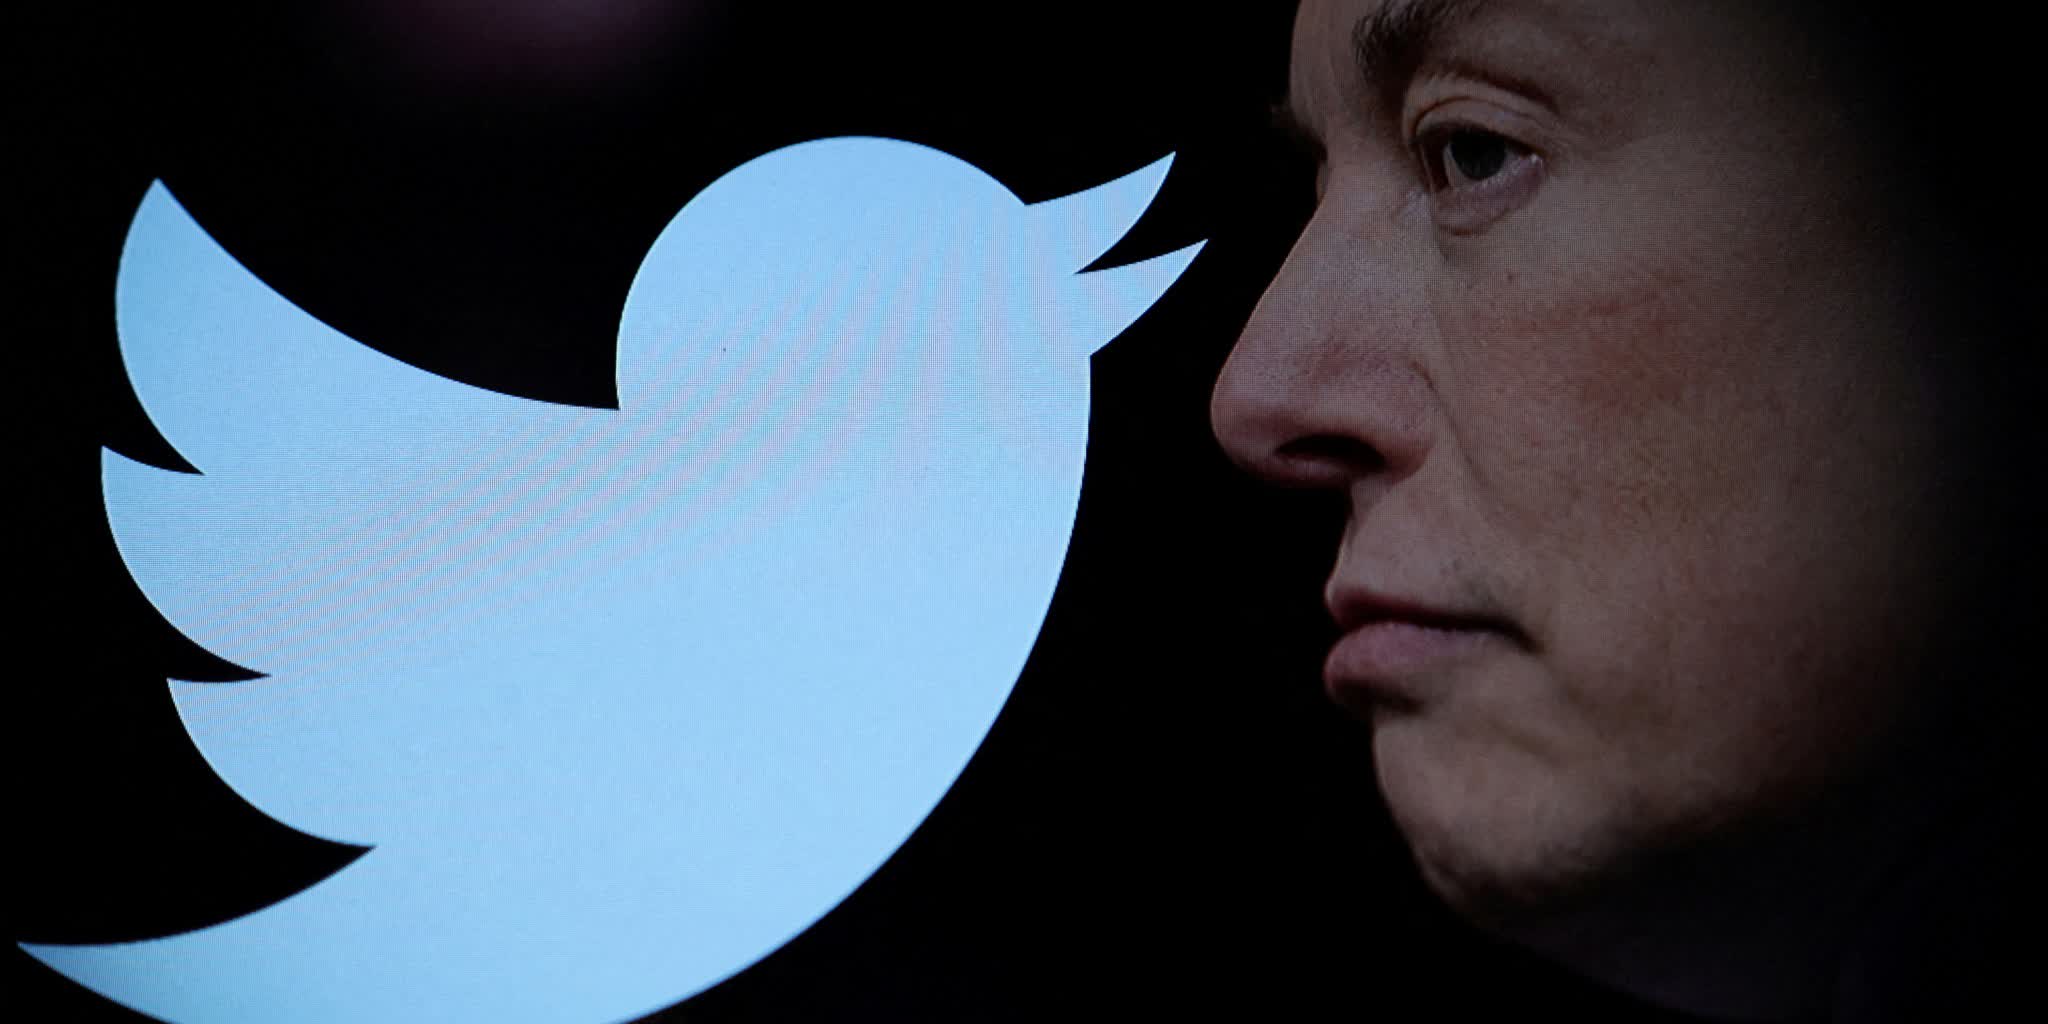 Elon Musk says Twitter worth US$20 Billion, or less than half what he bought it for